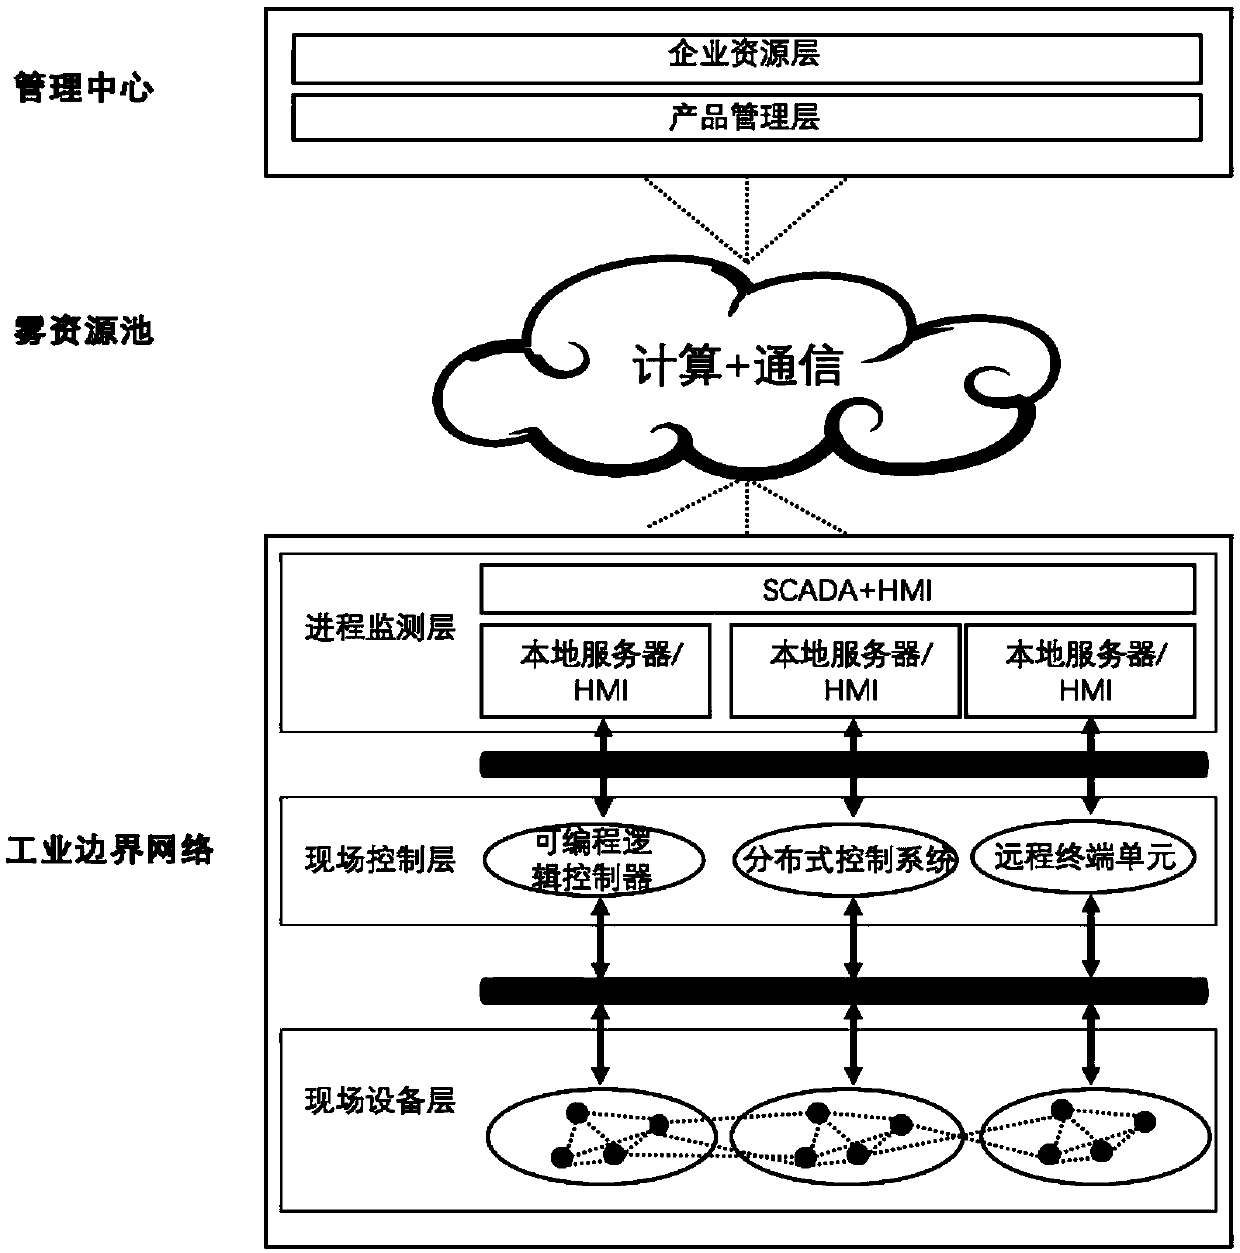 A fog computing industrial protocol construction method and system based on a generative adversarial network